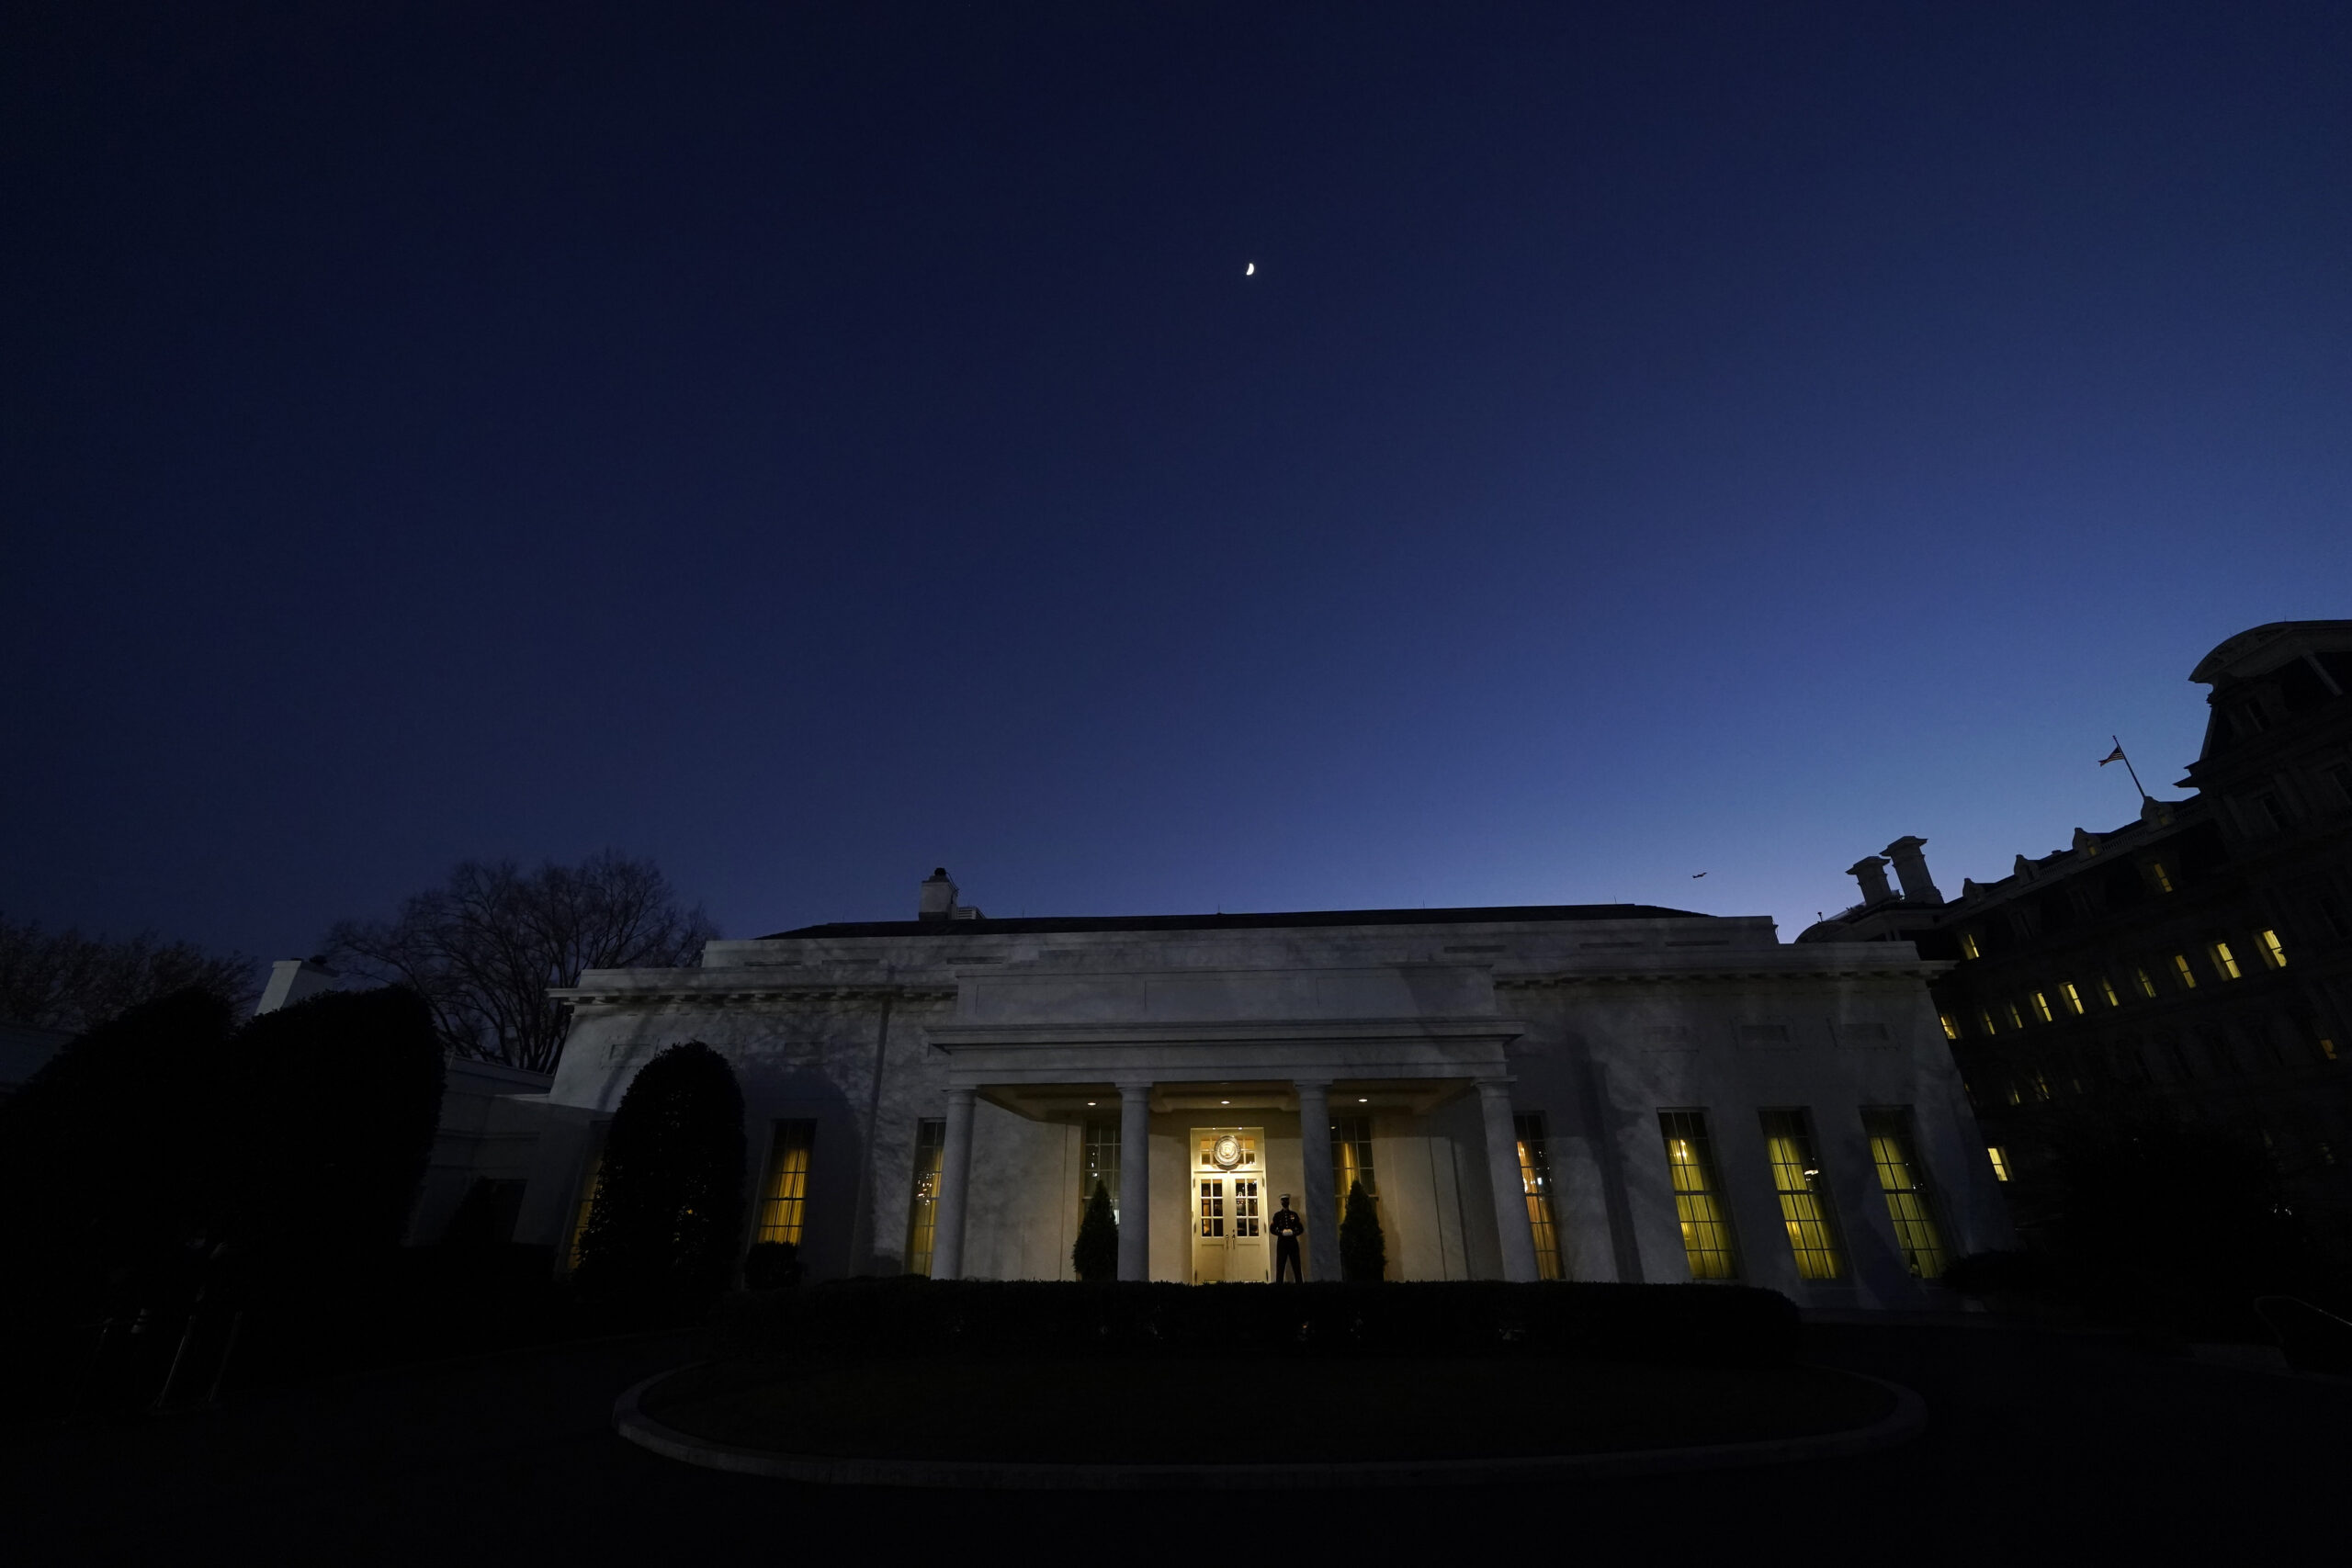 The moon rises over the West Wing of the White House, on President Donald Trump's last day in office, Tuesday, Jan. 19, 2021, in Washington. The Marine guard at the entrance signifies the president is in the Oval Office. (AP Photo/Gerald Herbert)